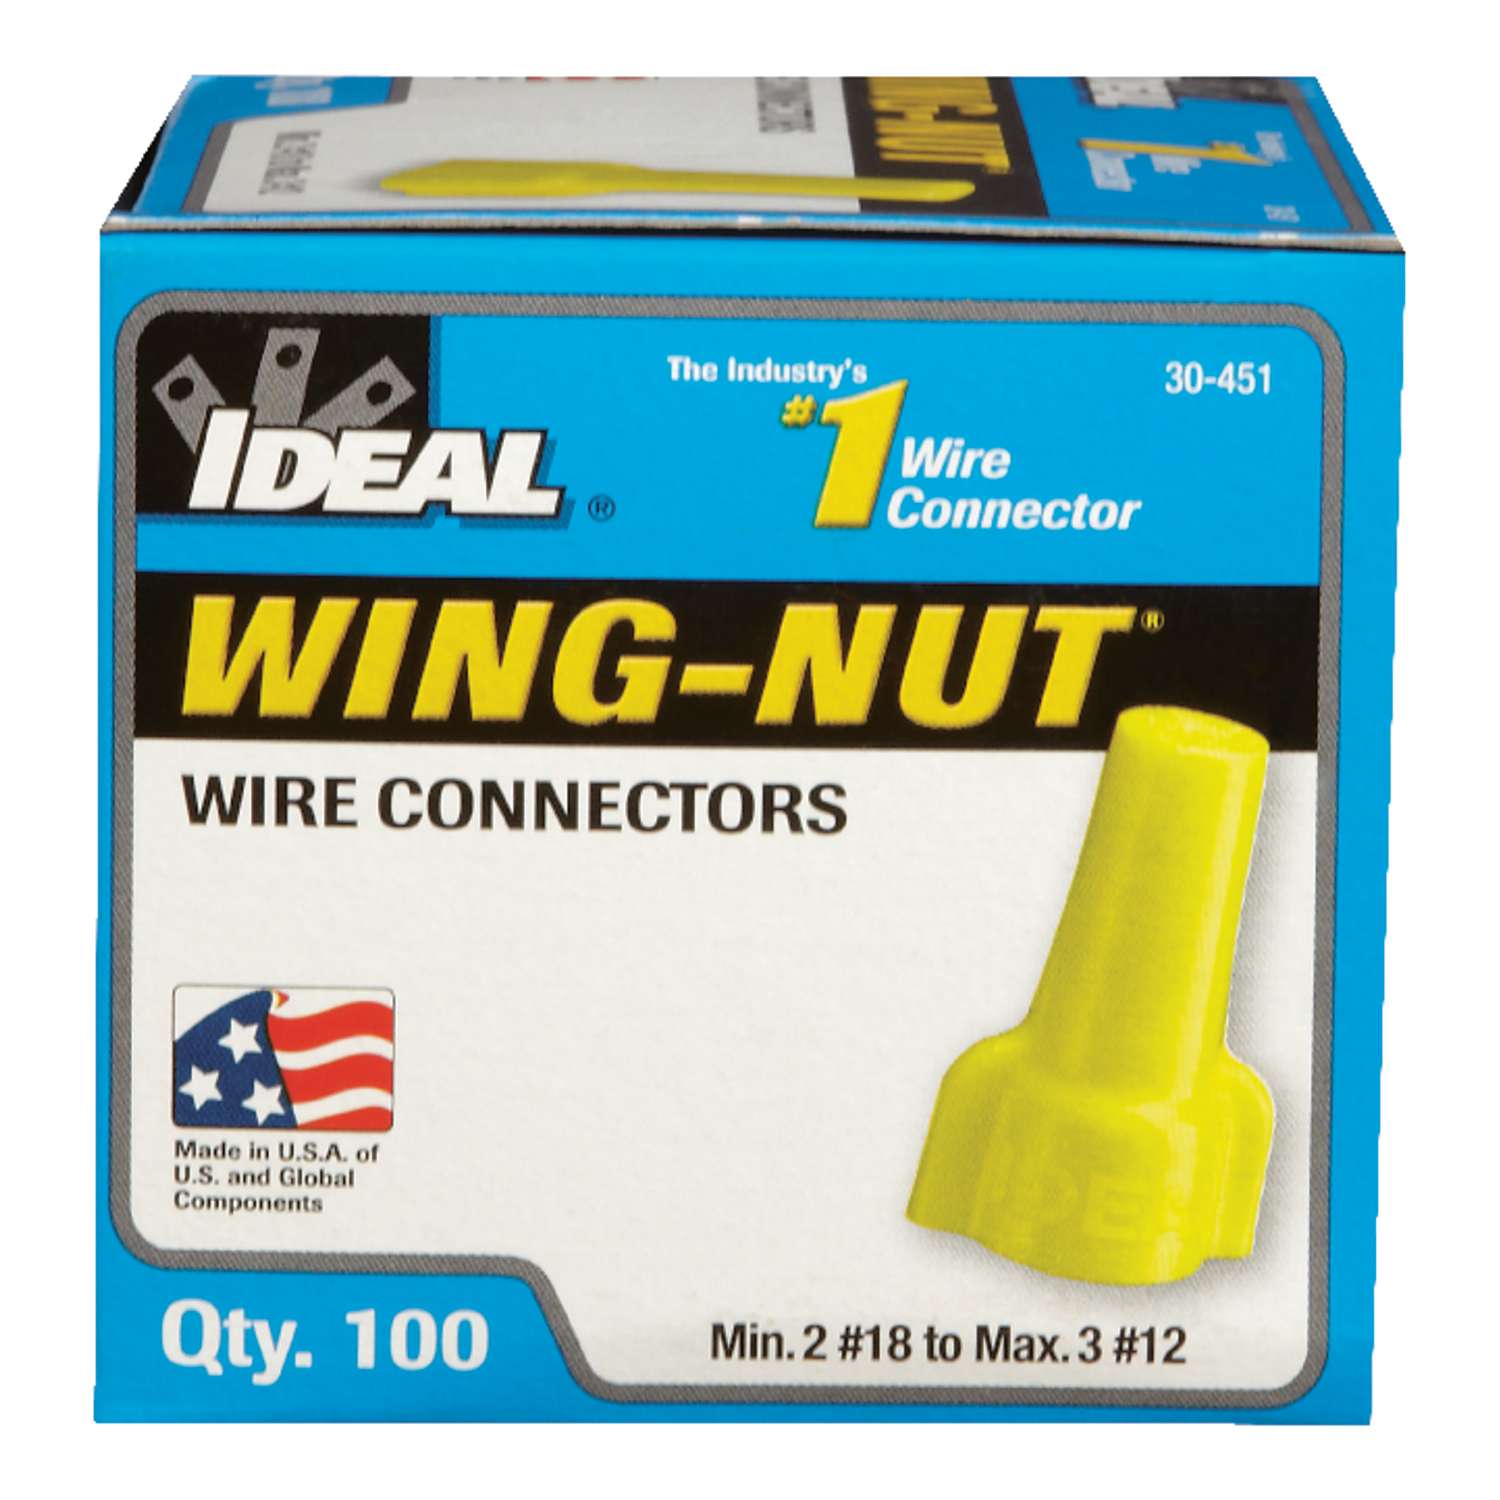 500 ct Wire Nut 10-6 AWG Copper-Copper Connections Bramec 8658 Winged Screw-On Wire Connectors 10 Packs of 50 Wire Spring Large Blue Tough Flame-Retardant 